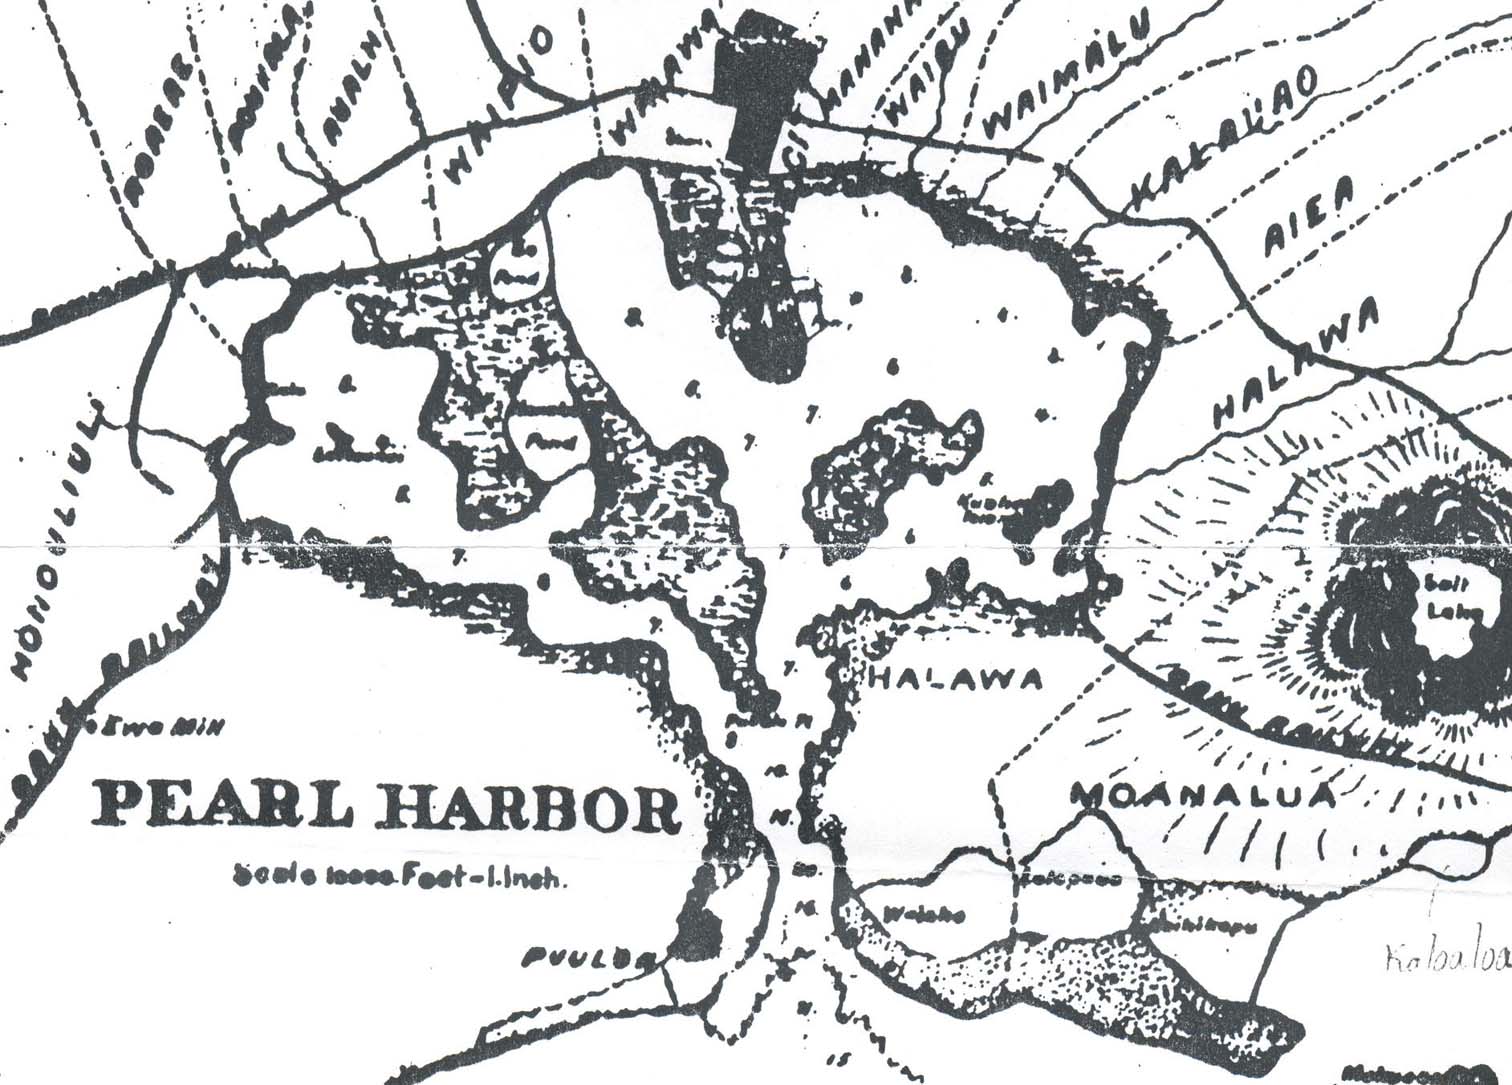 1897 Map of Pearl Harbor, Hawaii and surrounding lands.